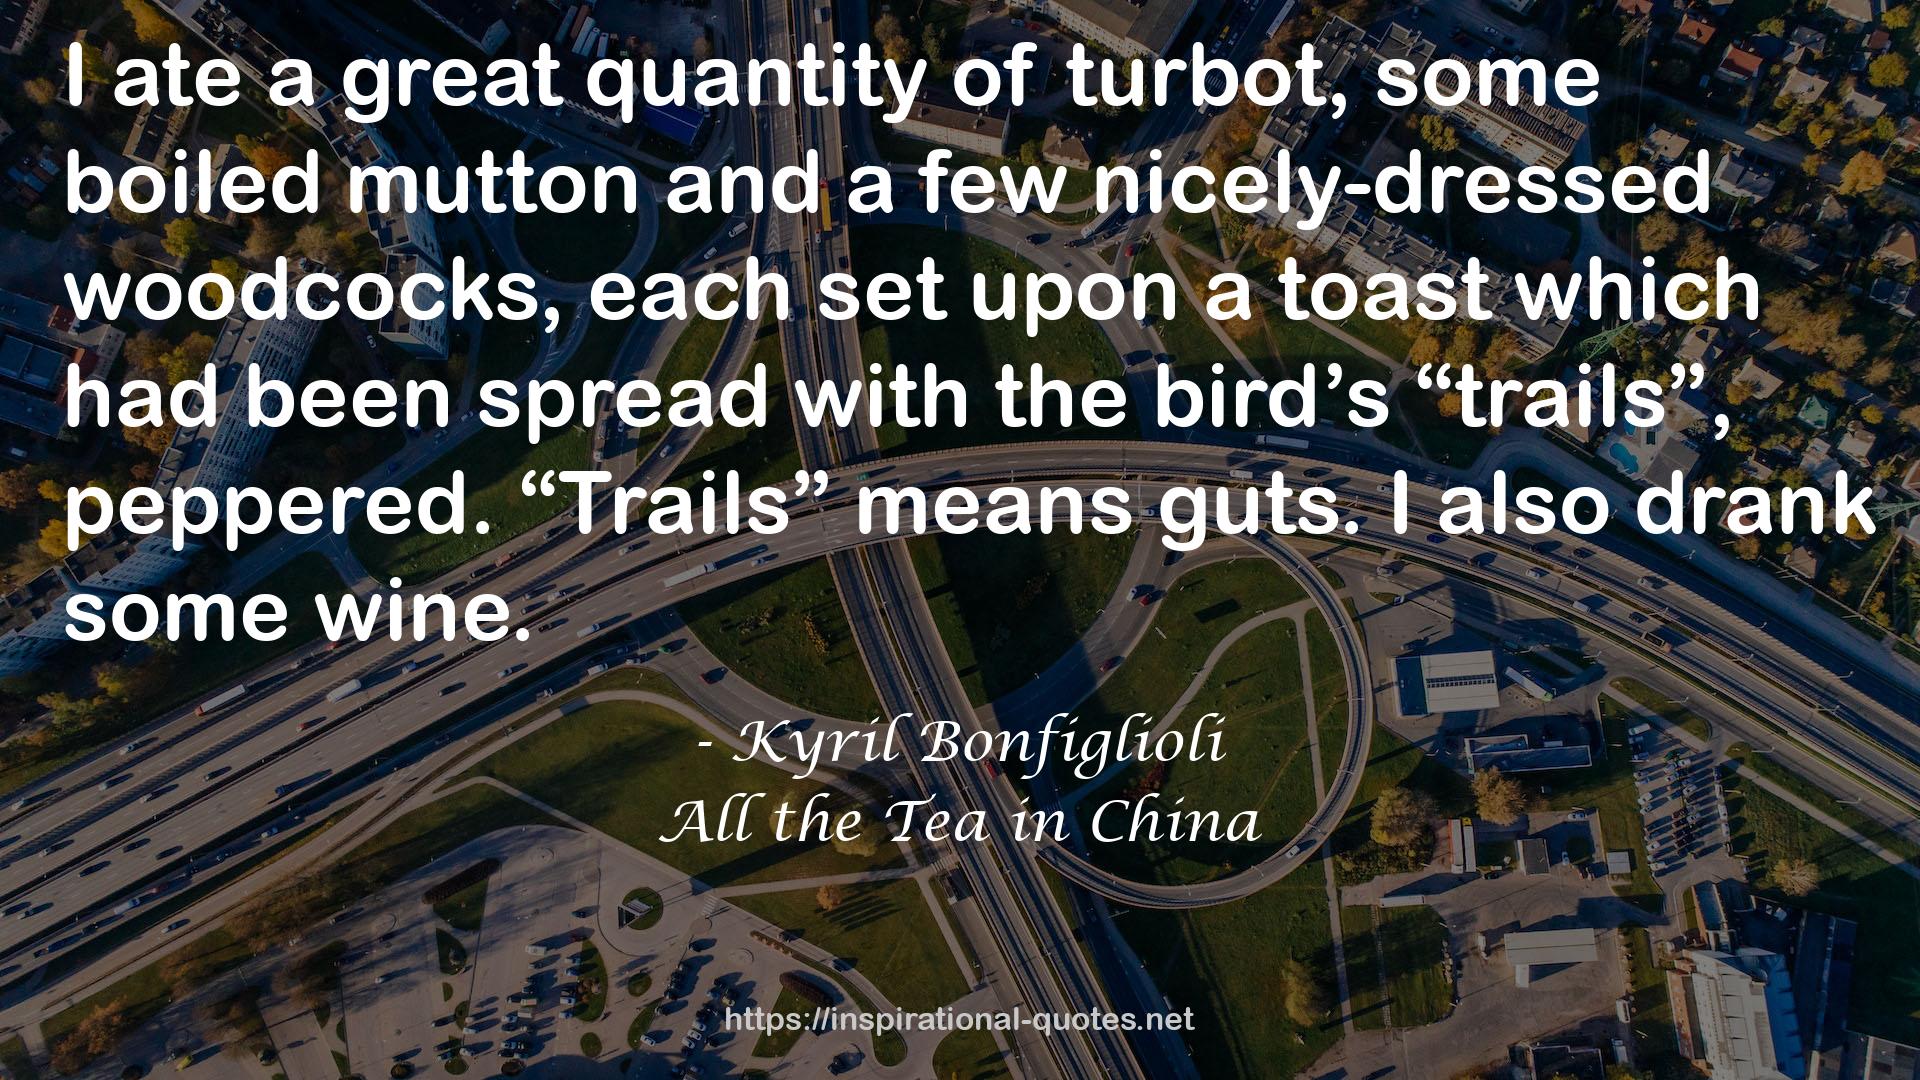 All the Tea in China QUOTES